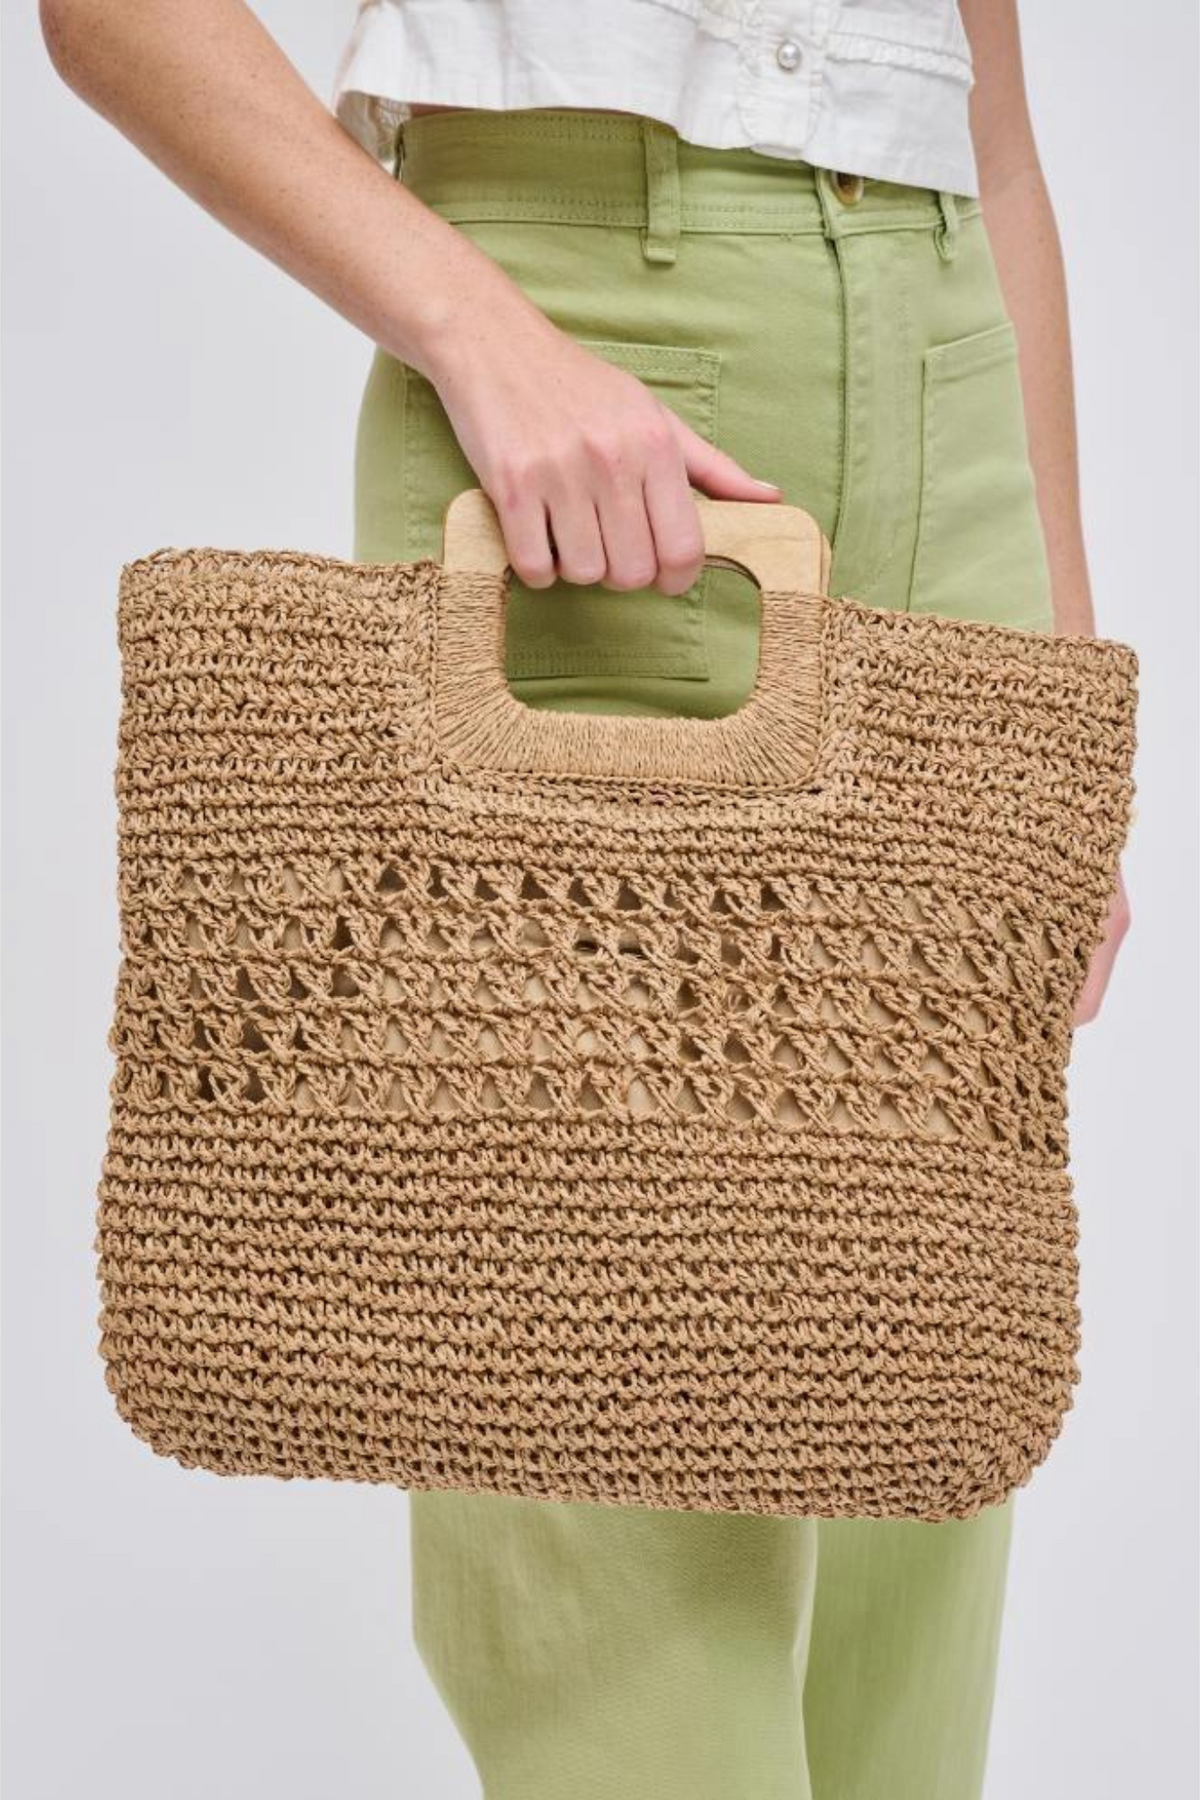 Urban Expressions | Rosario Tote | Sweetest Stitch Online Boutique